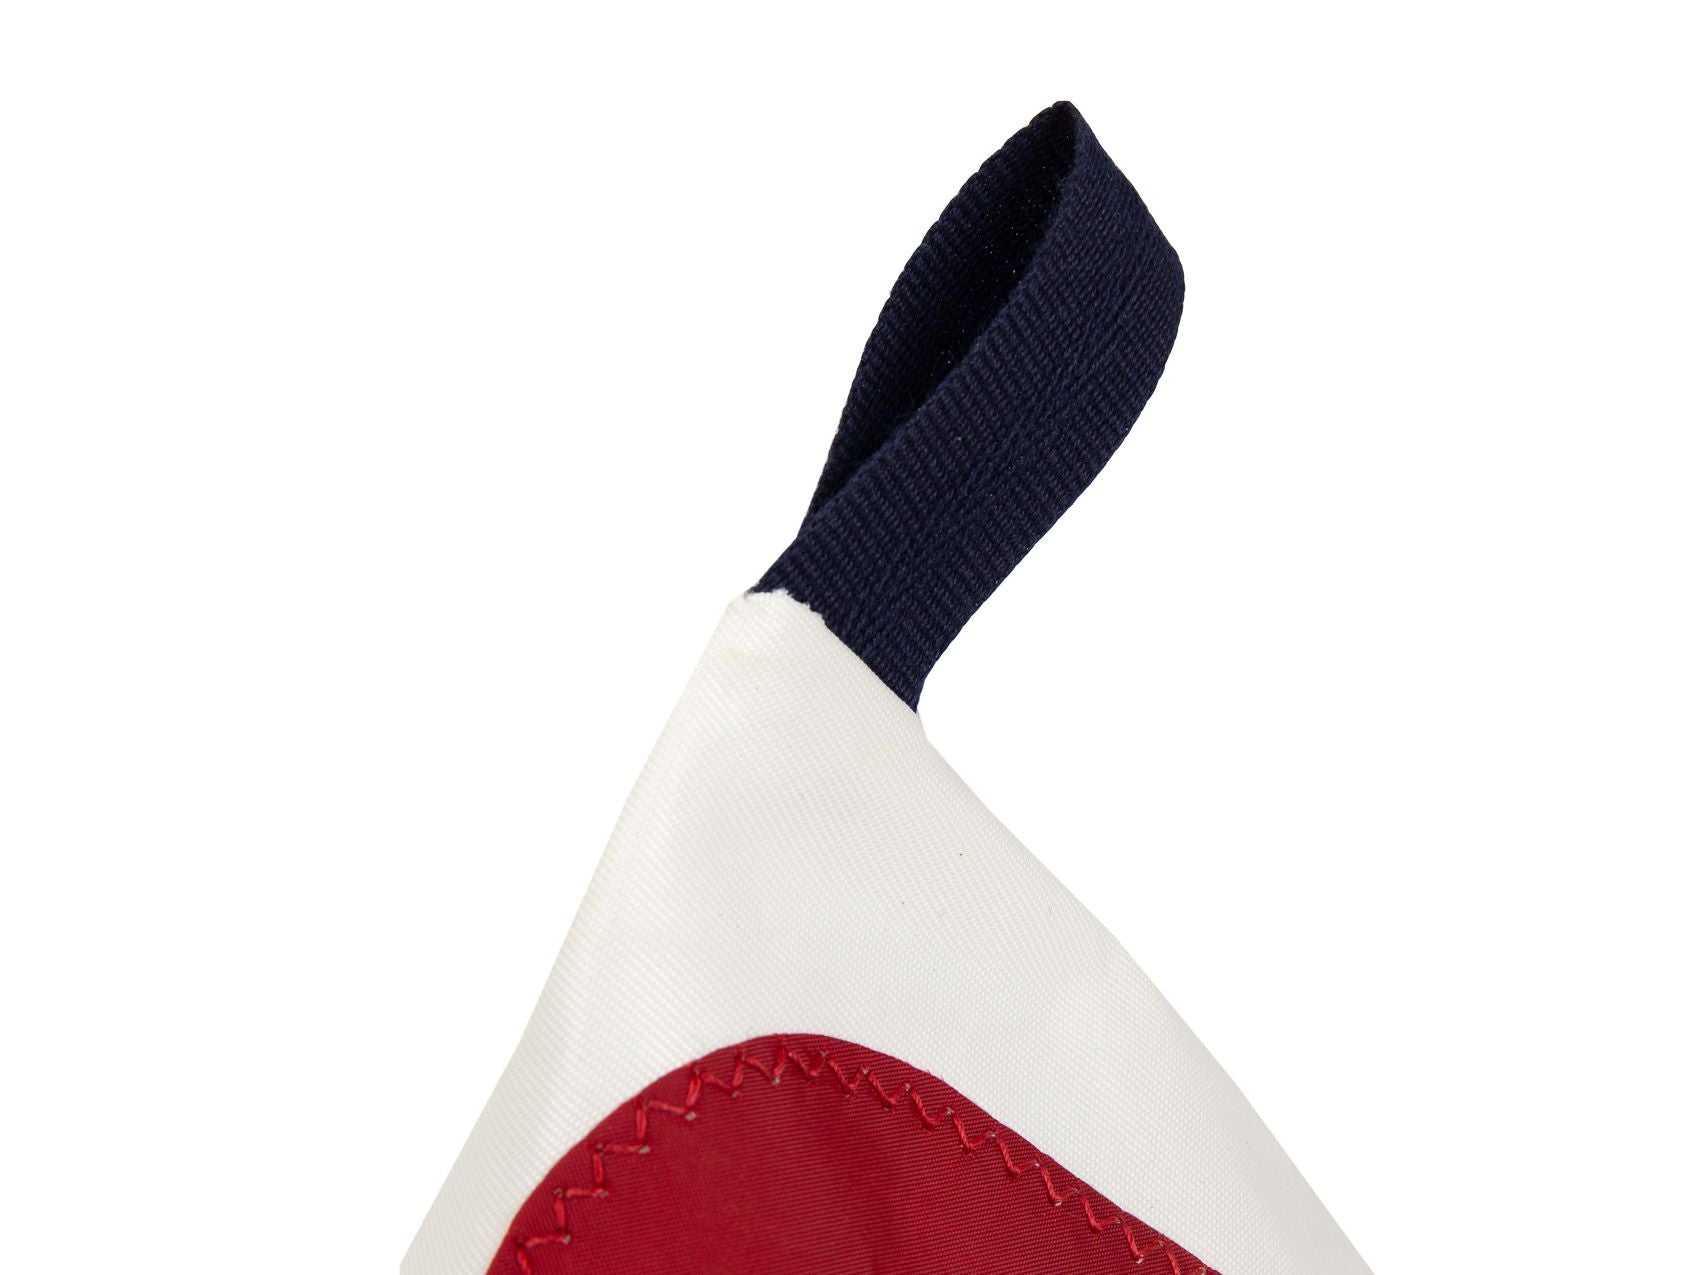 Made of white and red Dacron sail and navy stripes canvas, and adorned with an oversized red number '6', this pyramid-shaped door stopper will add a splash of colour and nautical character to your interior!